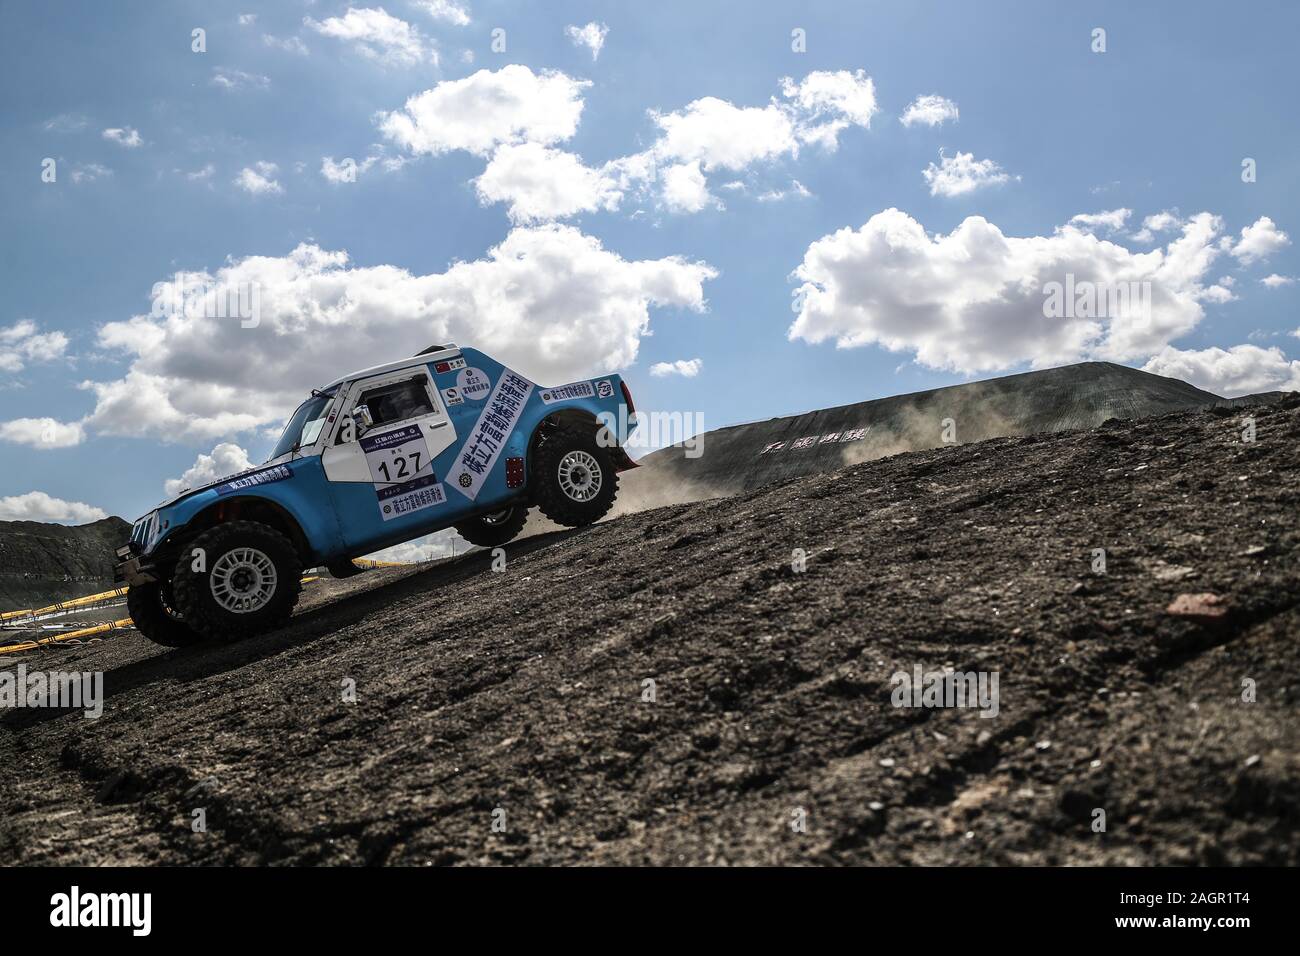 Beijing, China's Liaoning Province. 15th June, 2019. Xie Lei of Team Carboncube competes during the China Offroad Championship (COC) in Fuxin, northeast China's Liaoning Province, June 15, 2019. Credit: Pan Yulong/Xinhua/Alamy Live News Stock Photo